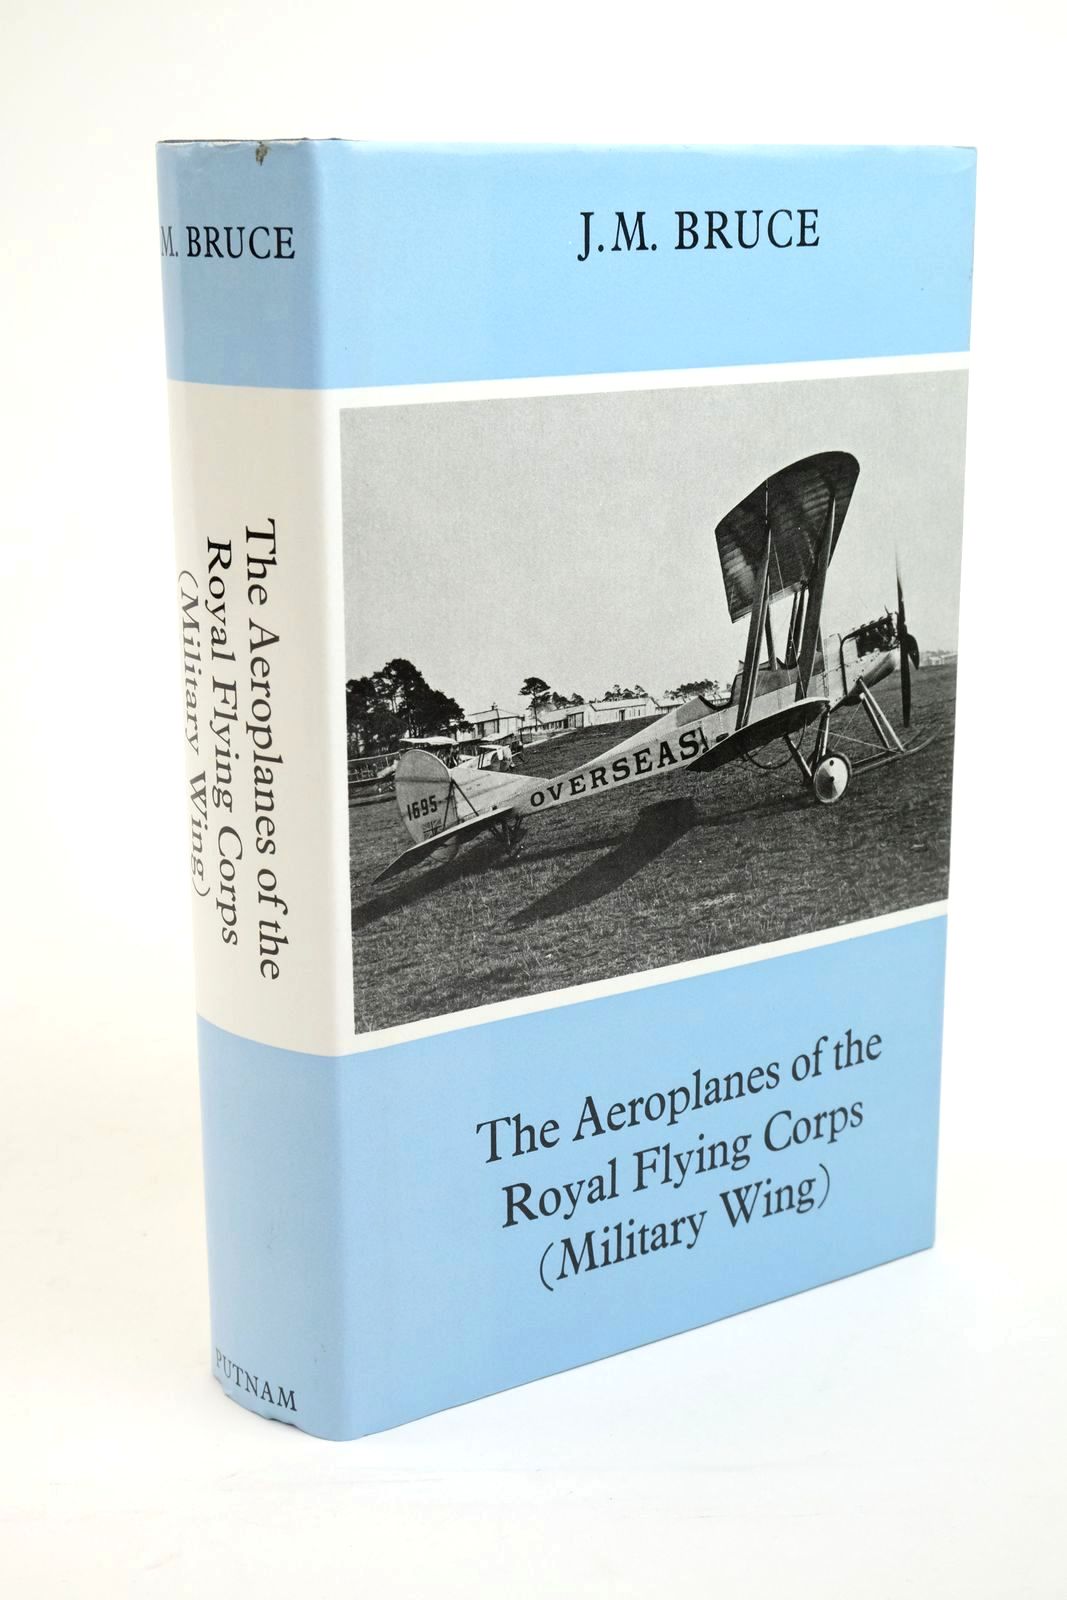 Photo of THE AEROPLANES OF THE ROYAL FLYING CORPS (MILITARY WING) written by Bruce, J.M. published by Putnam (STOCK CODE: 1322022)  for sale by Stella & Rose's Books